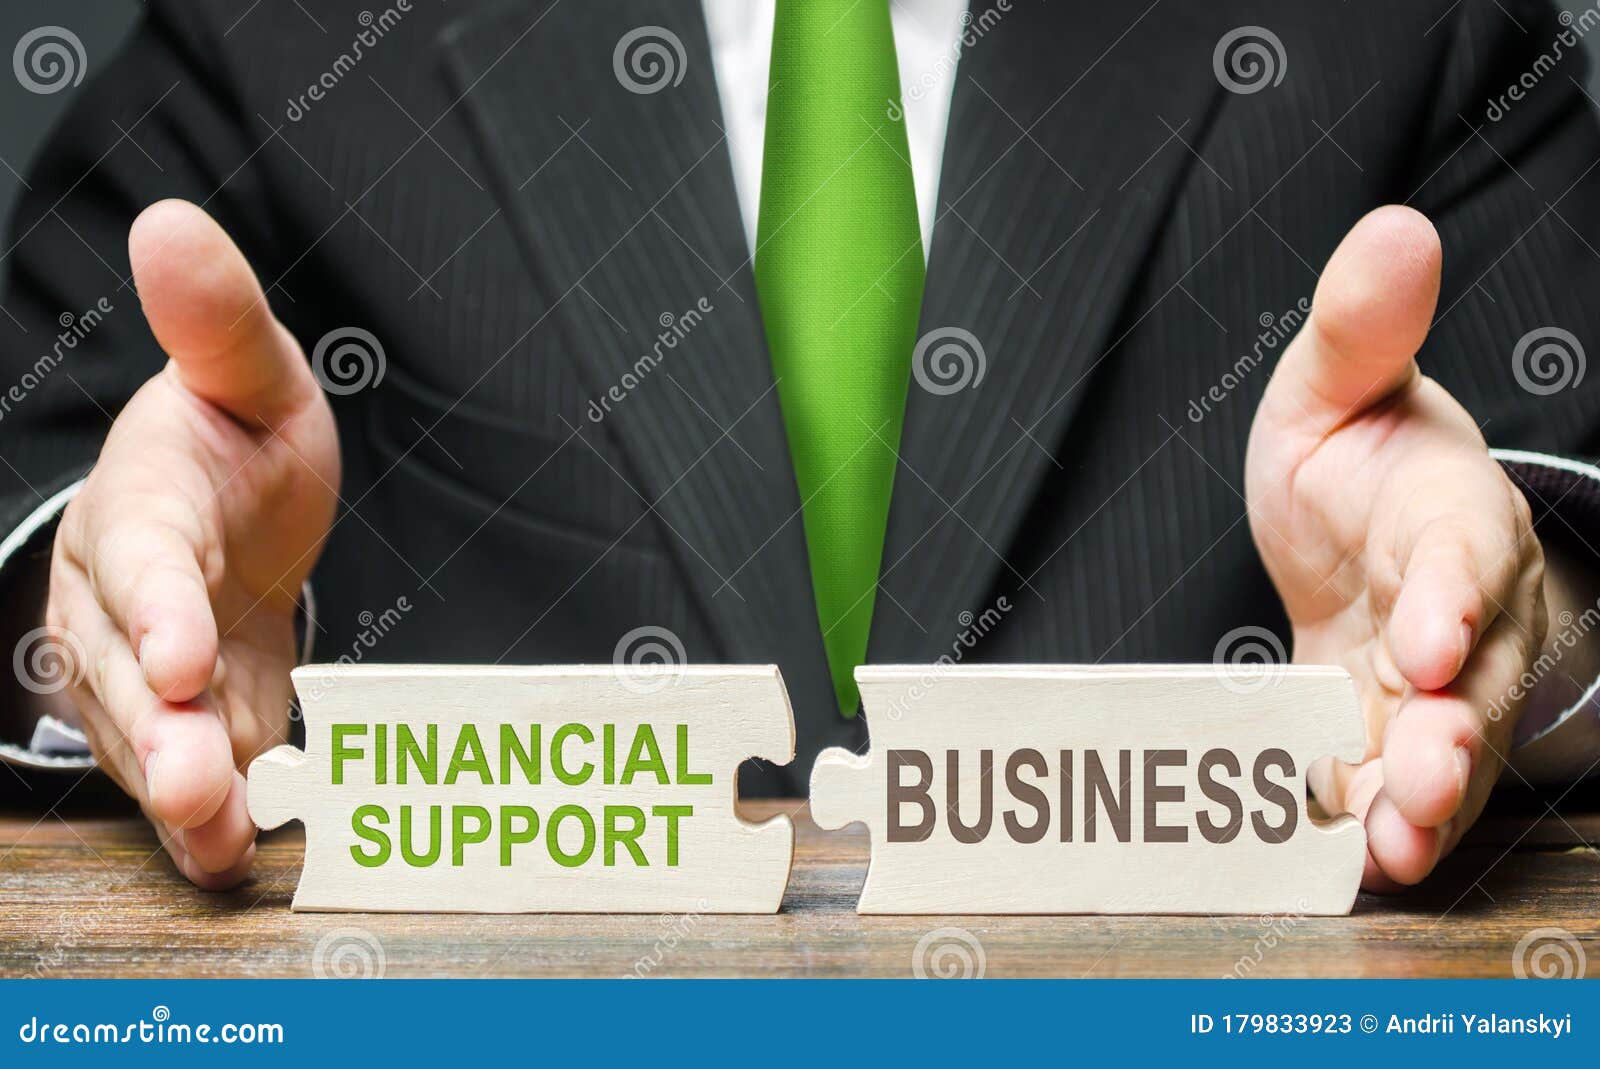 man connects two puzzles providing financial support to business in a crisis situation. government assistance in overcoming the